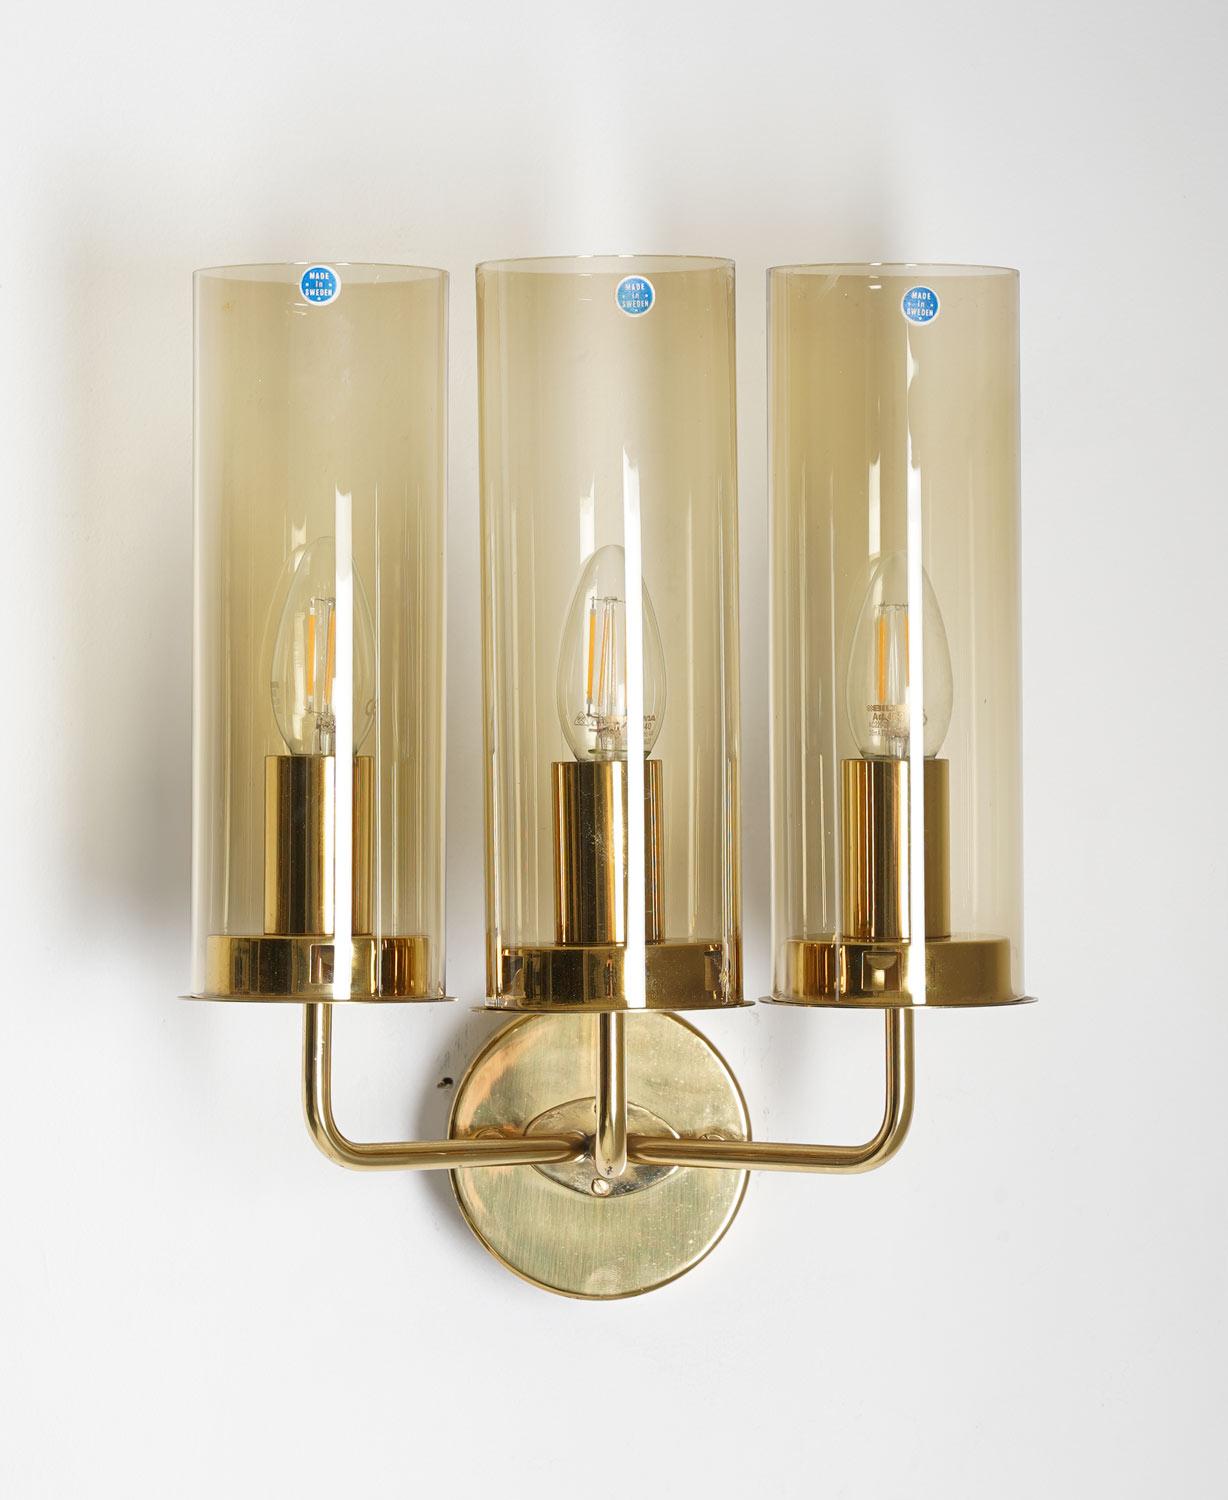 These Hans-Agne Jakobsson wall lights are a stunning example of the designer's exceptional talent and attention to detail. The 